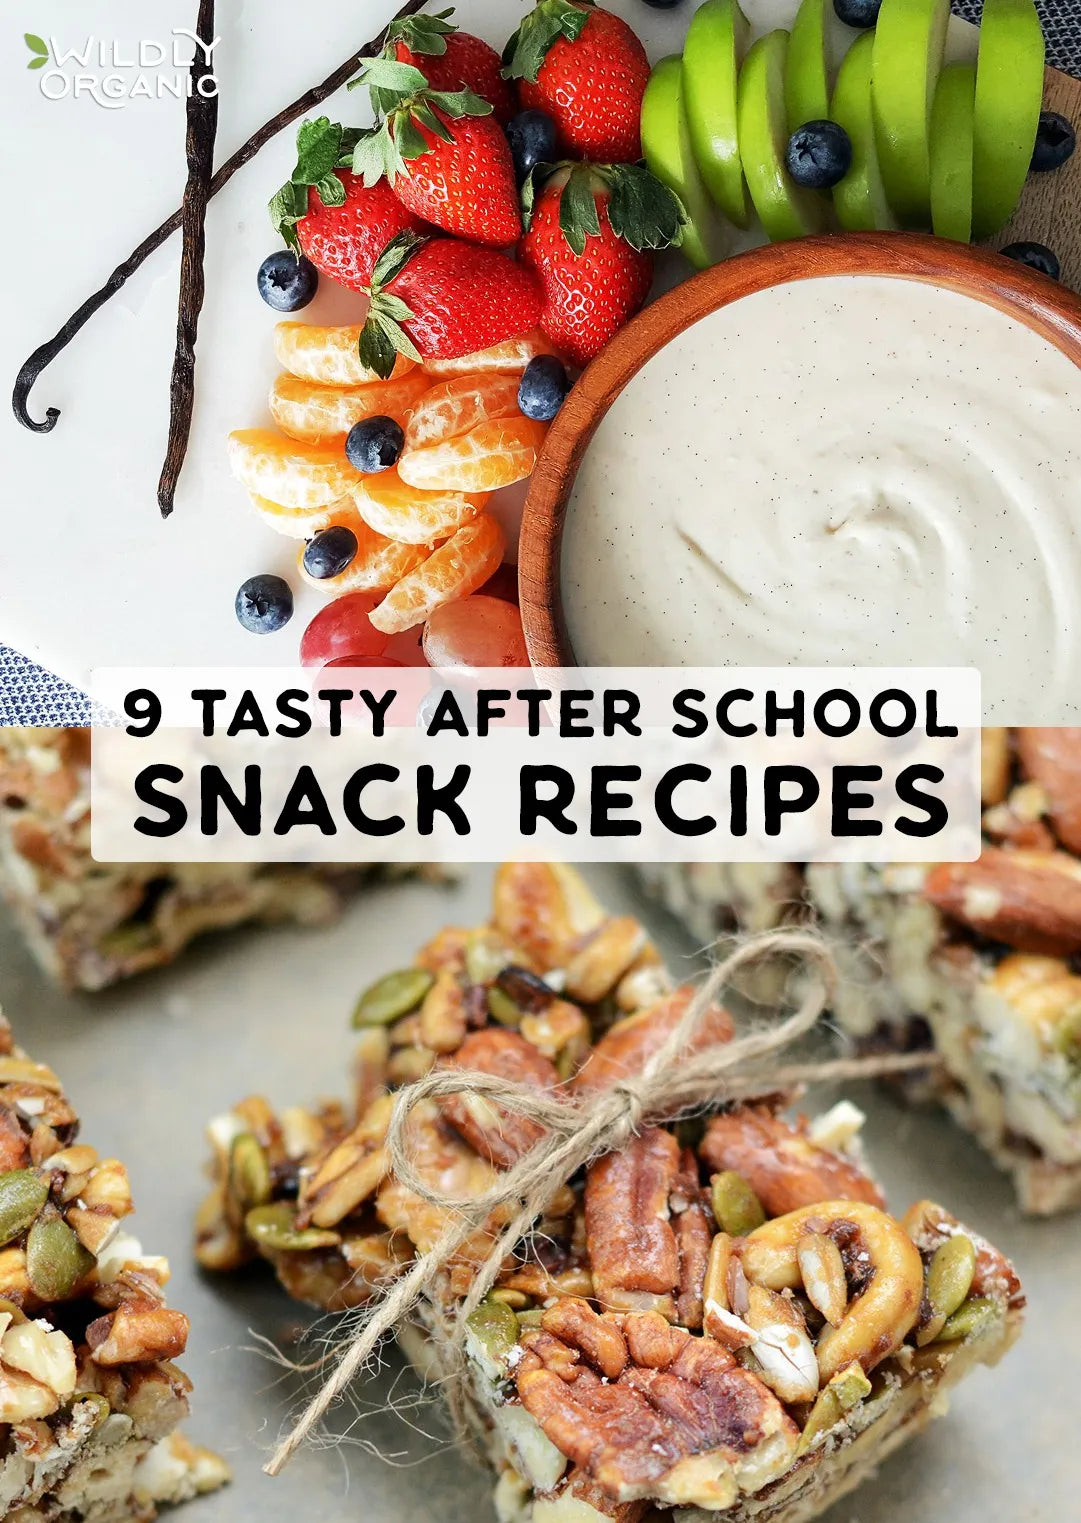 9 Tasty After School Snack Recipes | We're sharing 8 tasty after school snack recipes that your kids will absolutely love. In fact, we bet you'll love them, too!Â From easy loaded apple slices to superfood popcorn snack bars and even some grain-free cookies and milk cups, we have all of the delicious essentials for after school. You can even make ahead a bunch of these recipes to make snack time that much easier!Â #afterschool #healthy #snacks #schoolsnack #snacktime #glutenfree	